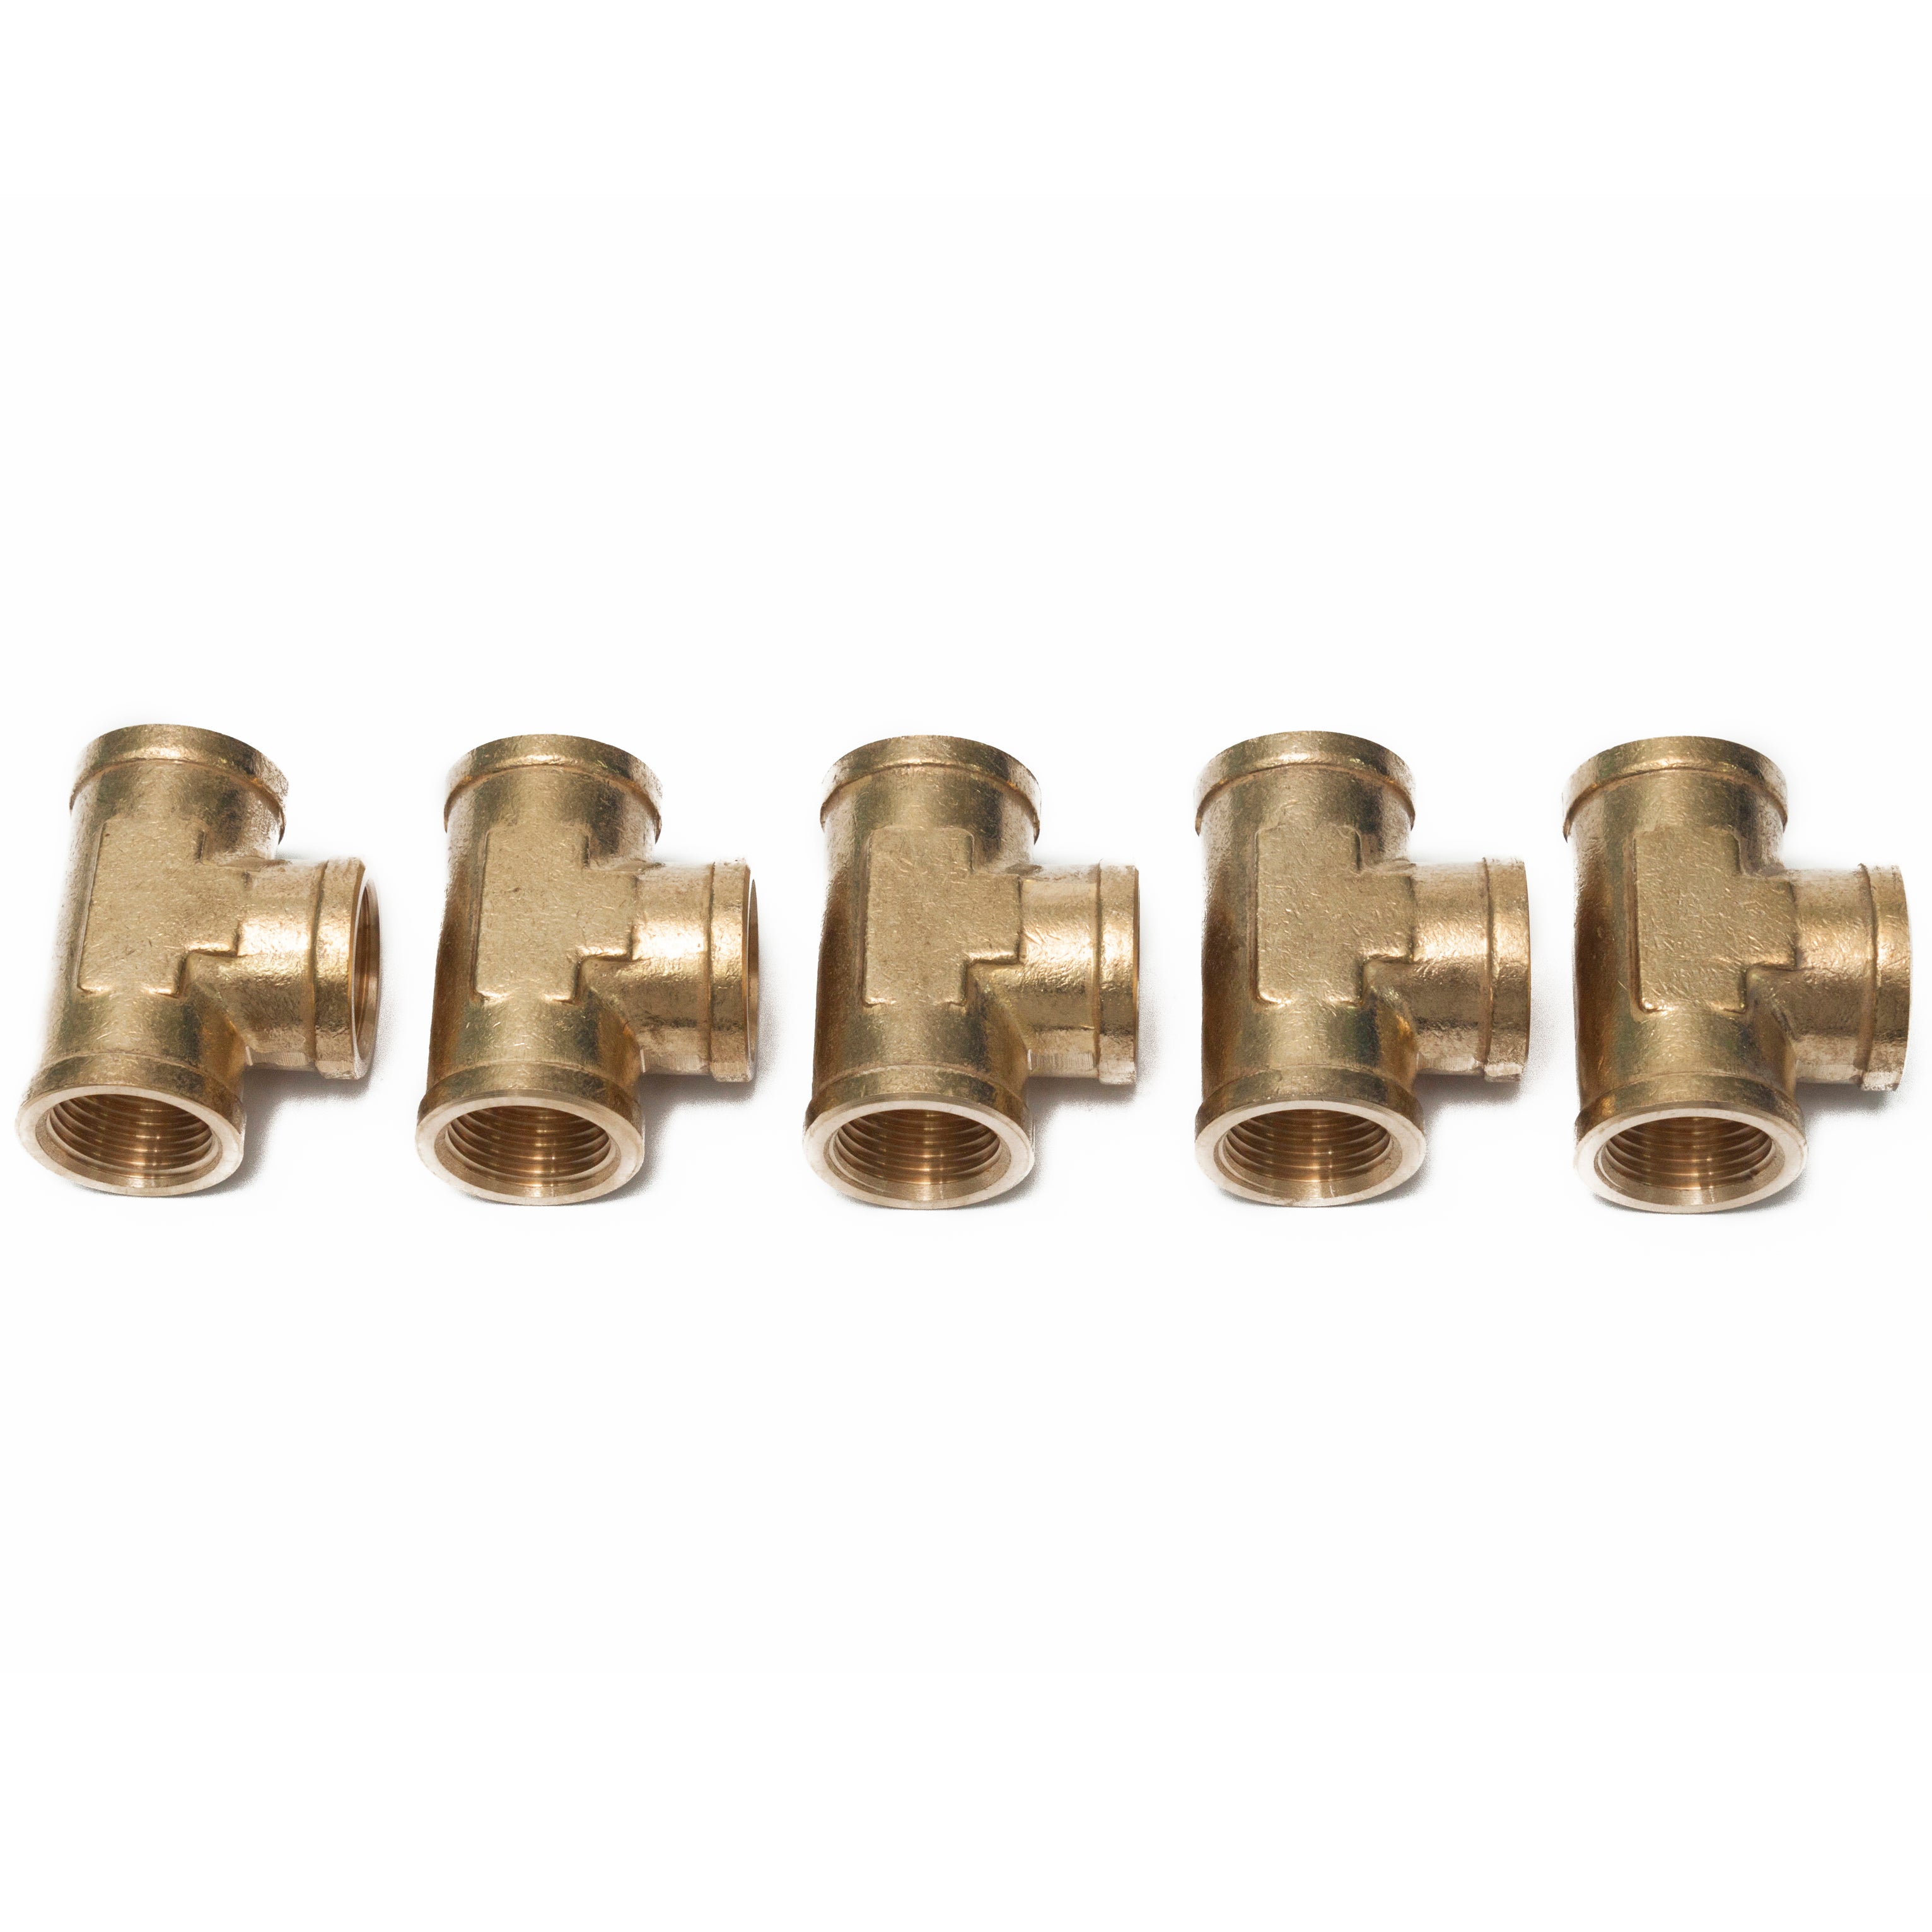 LTWFITTING Brass Pipe Fitting 1/2 Inch Female NPT Thread Tee Fuel